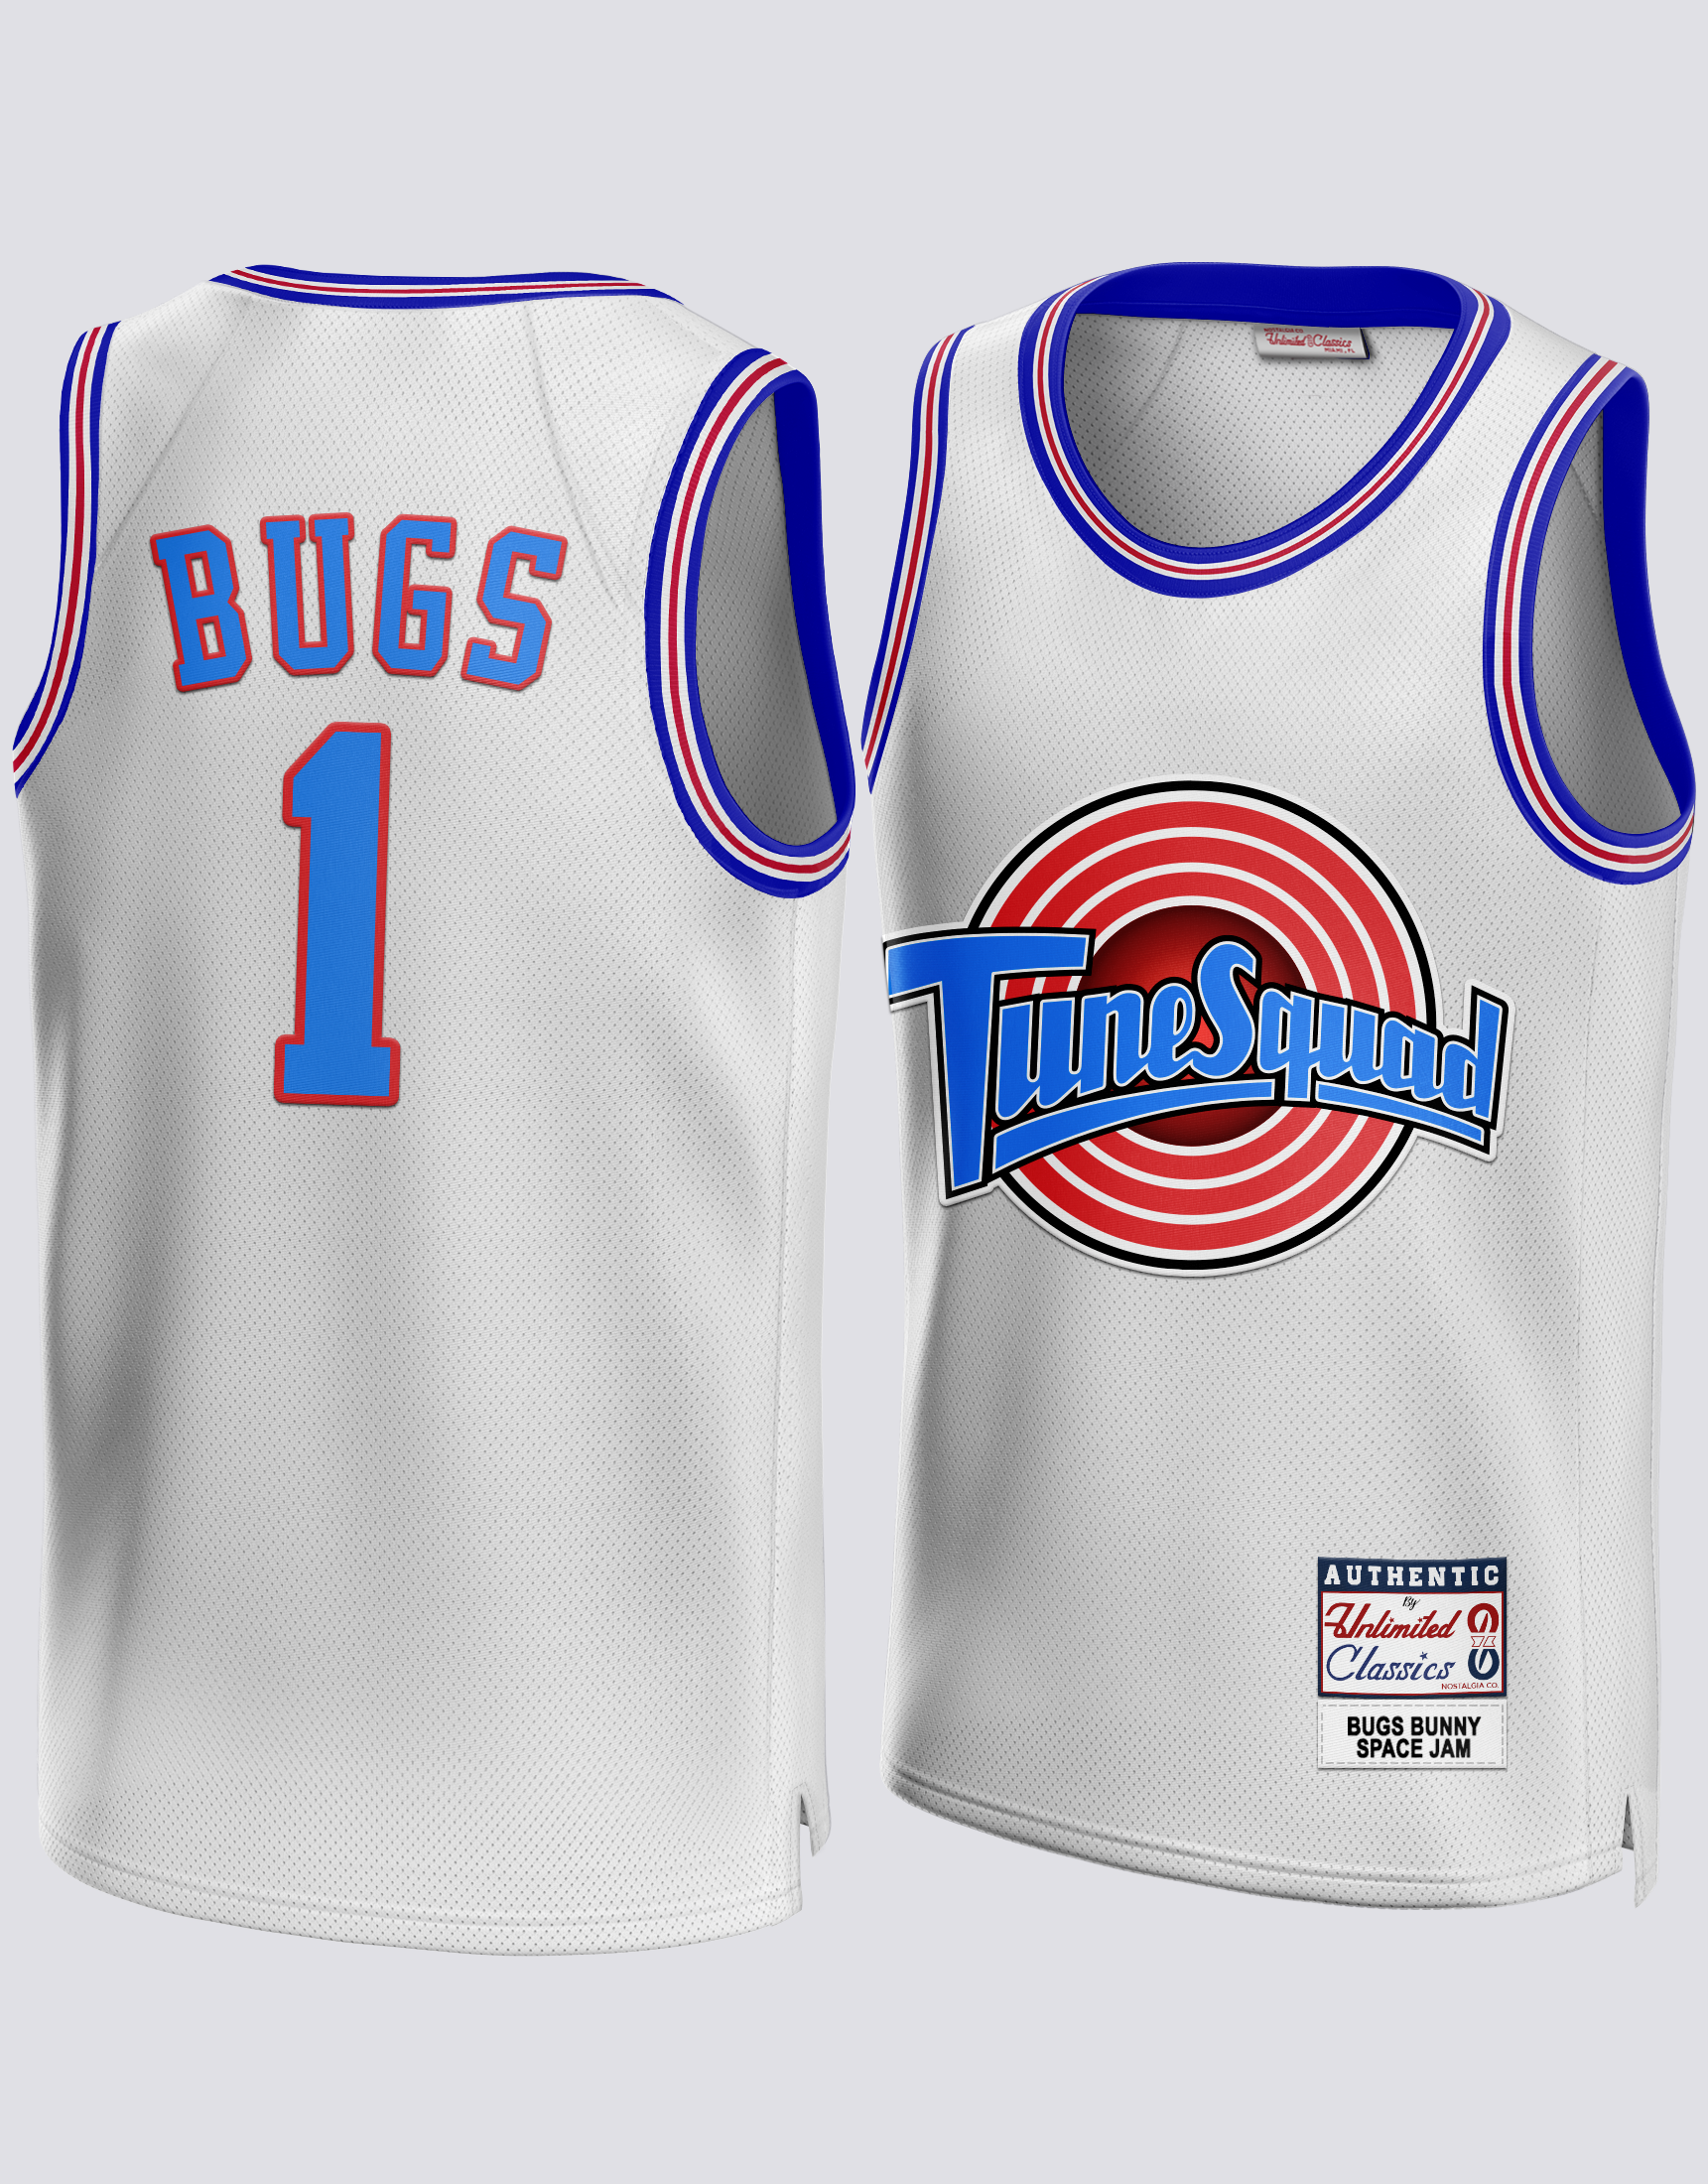 Bugs Bunny #1 Space Jam Tune Squad White Jersey - XL